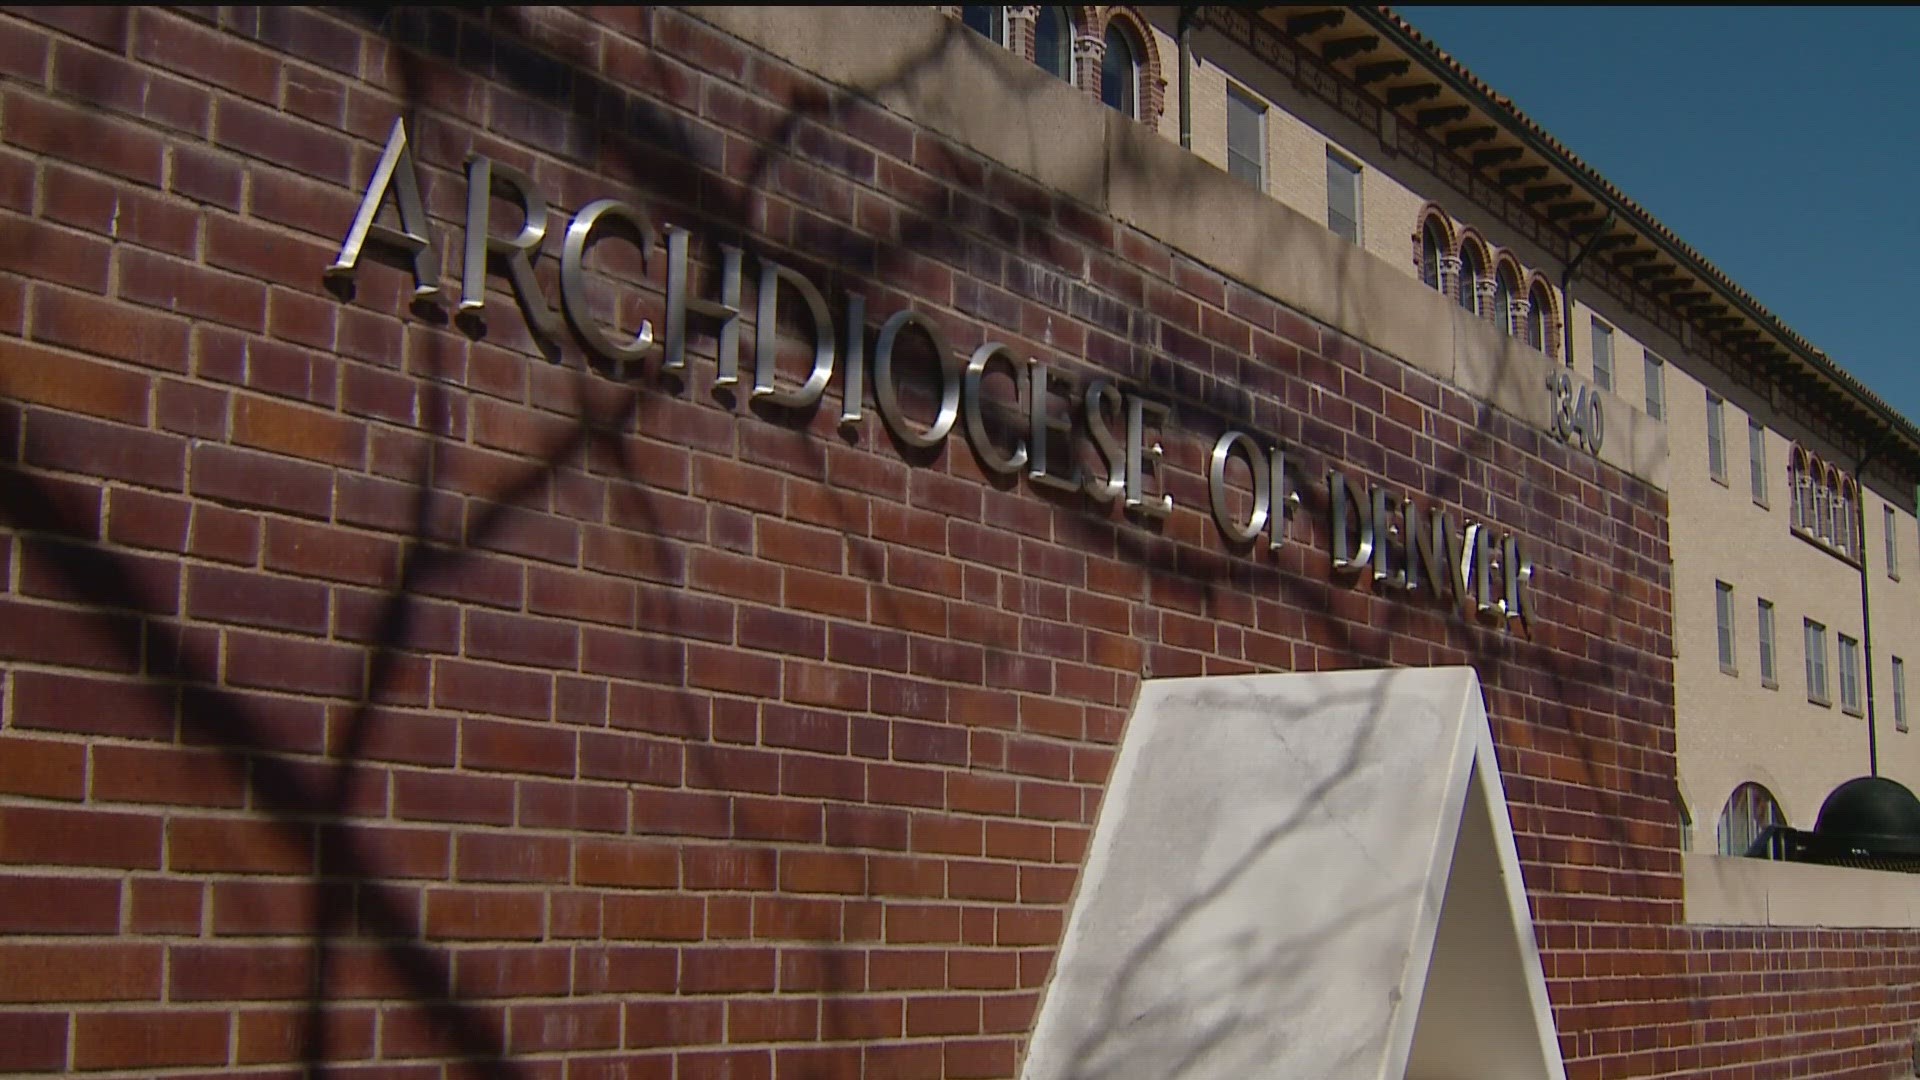 Wednesday two catholic preschools, and the Archdiocese of Denver, filed a lawsuit against the state.